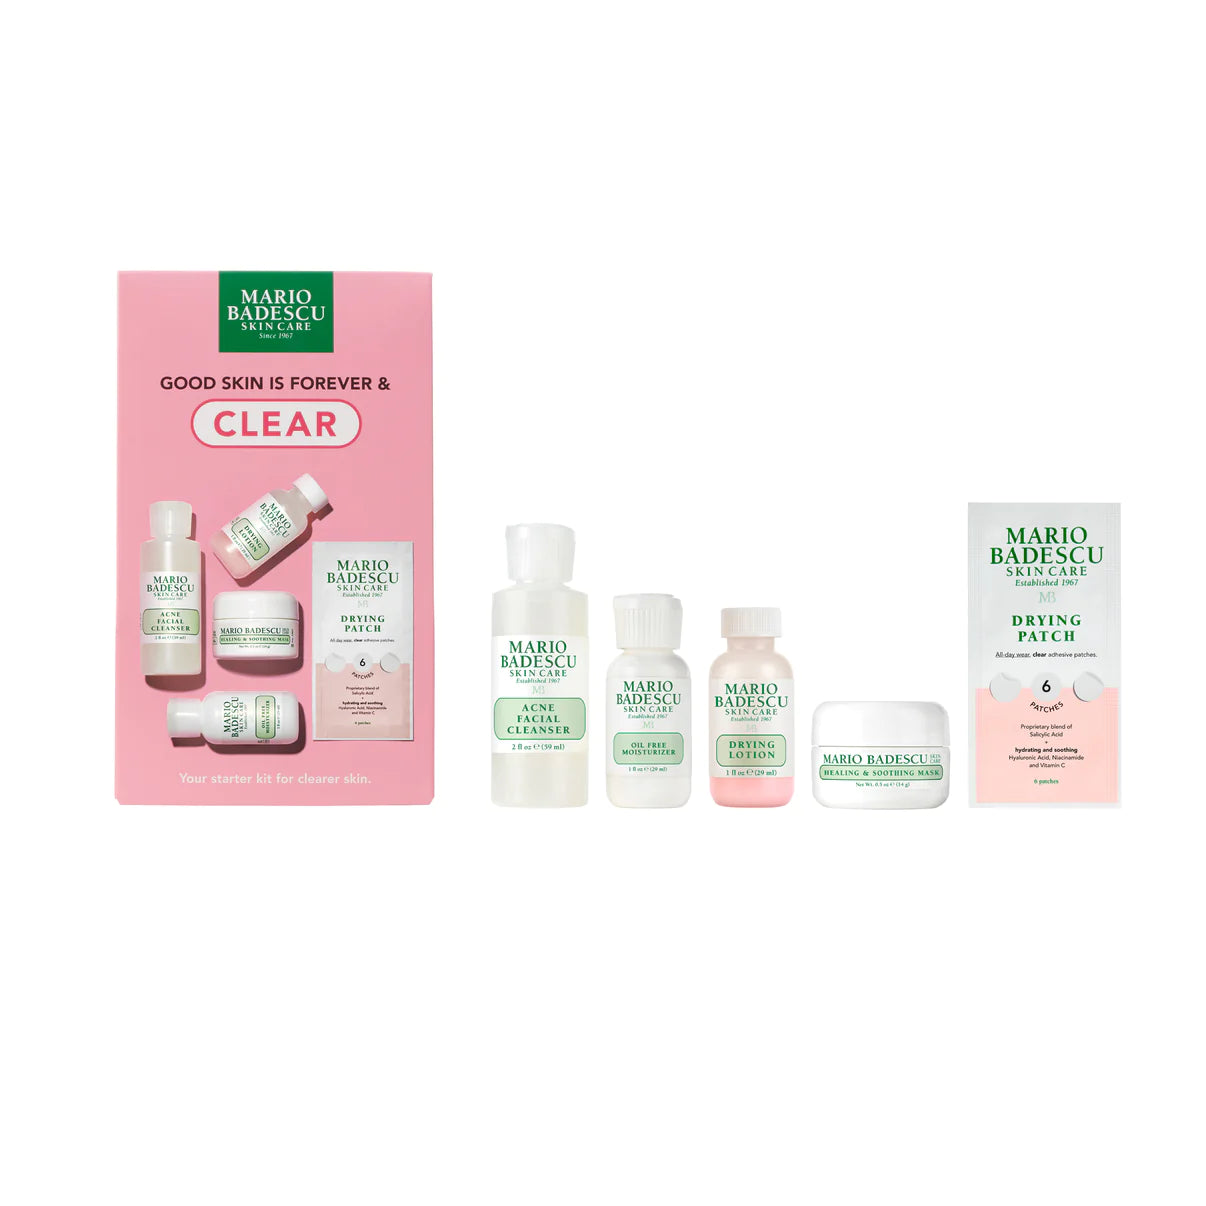 Mario Badescu - Good Skin Is Forever & Clear | Blemish Kit